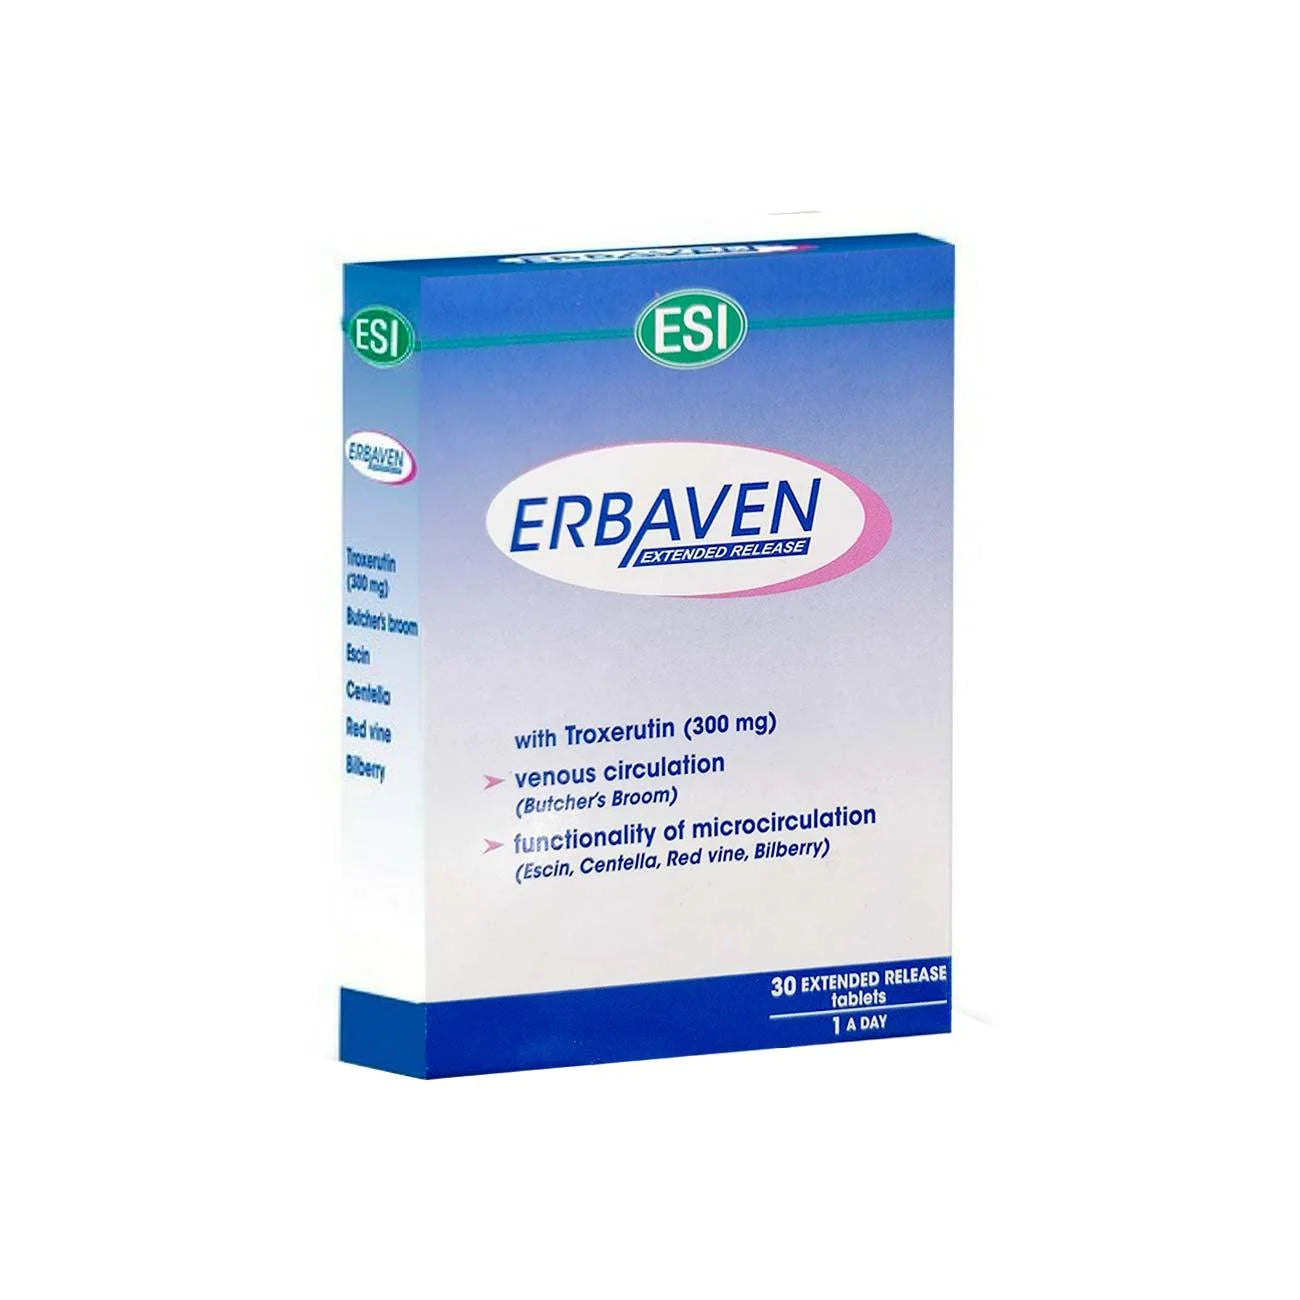 ESI Erbaven Extended Release